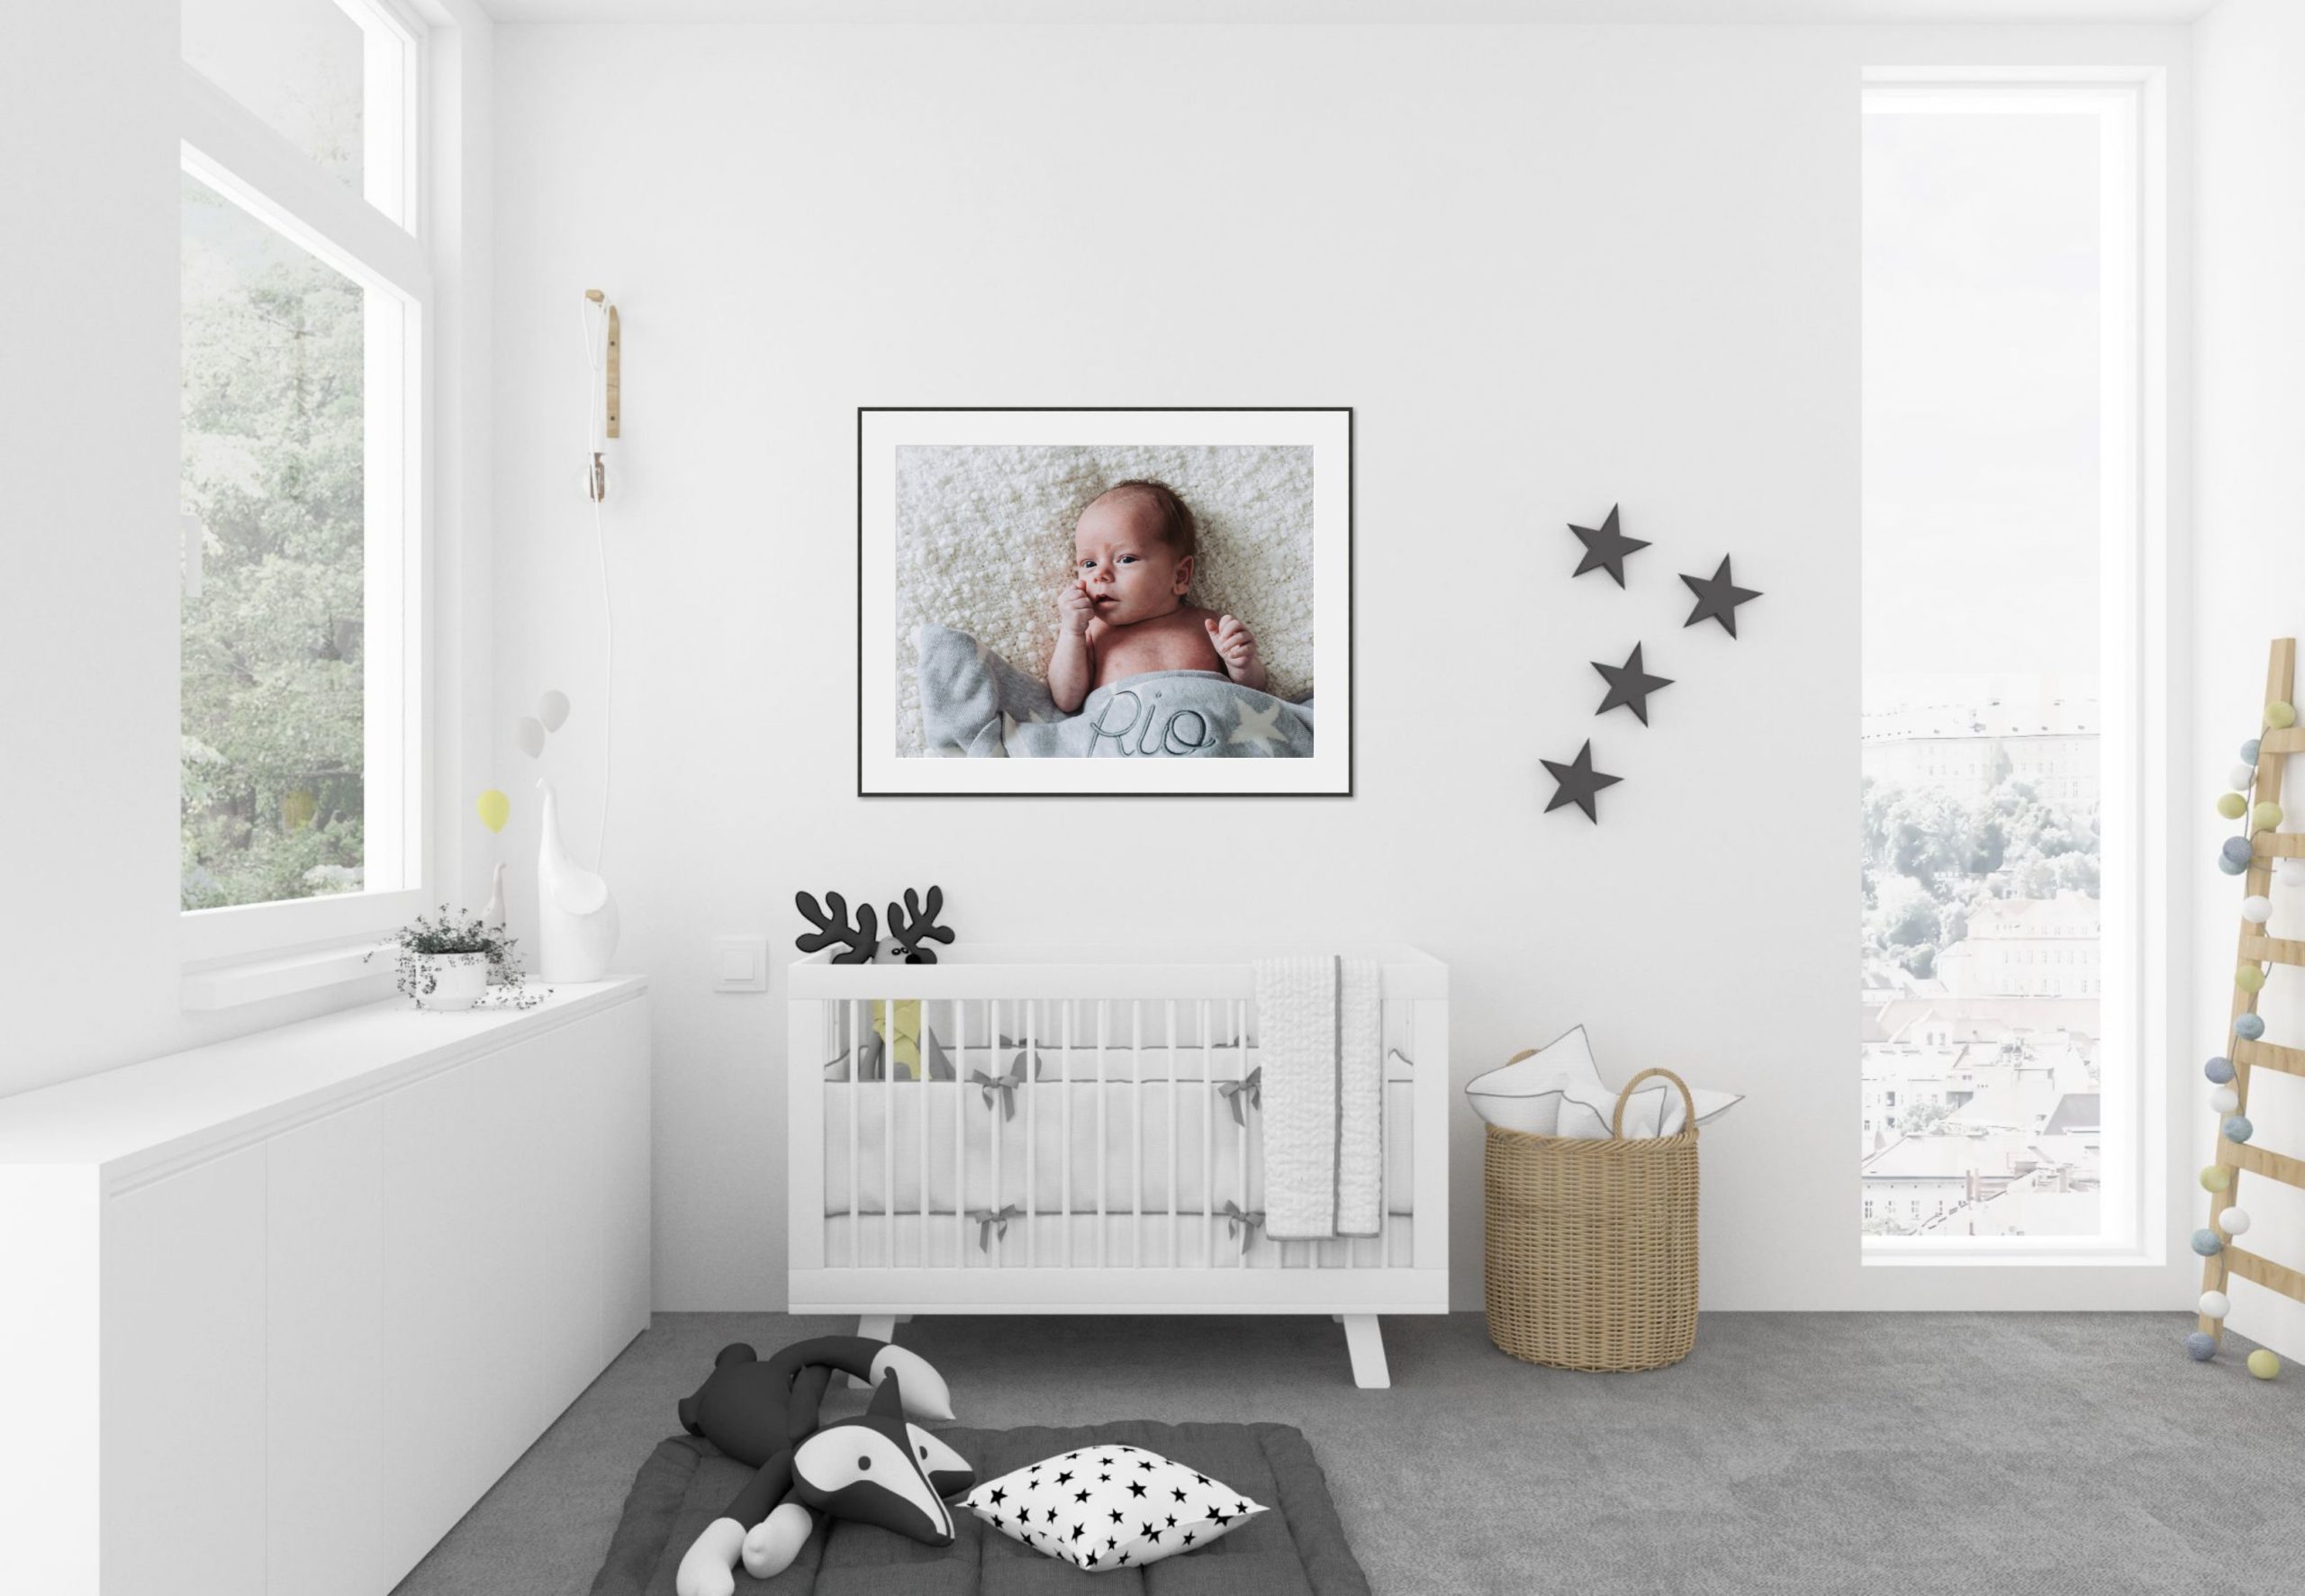 white and grey baby room interior displaying photography artwork of young baby portraits in situ